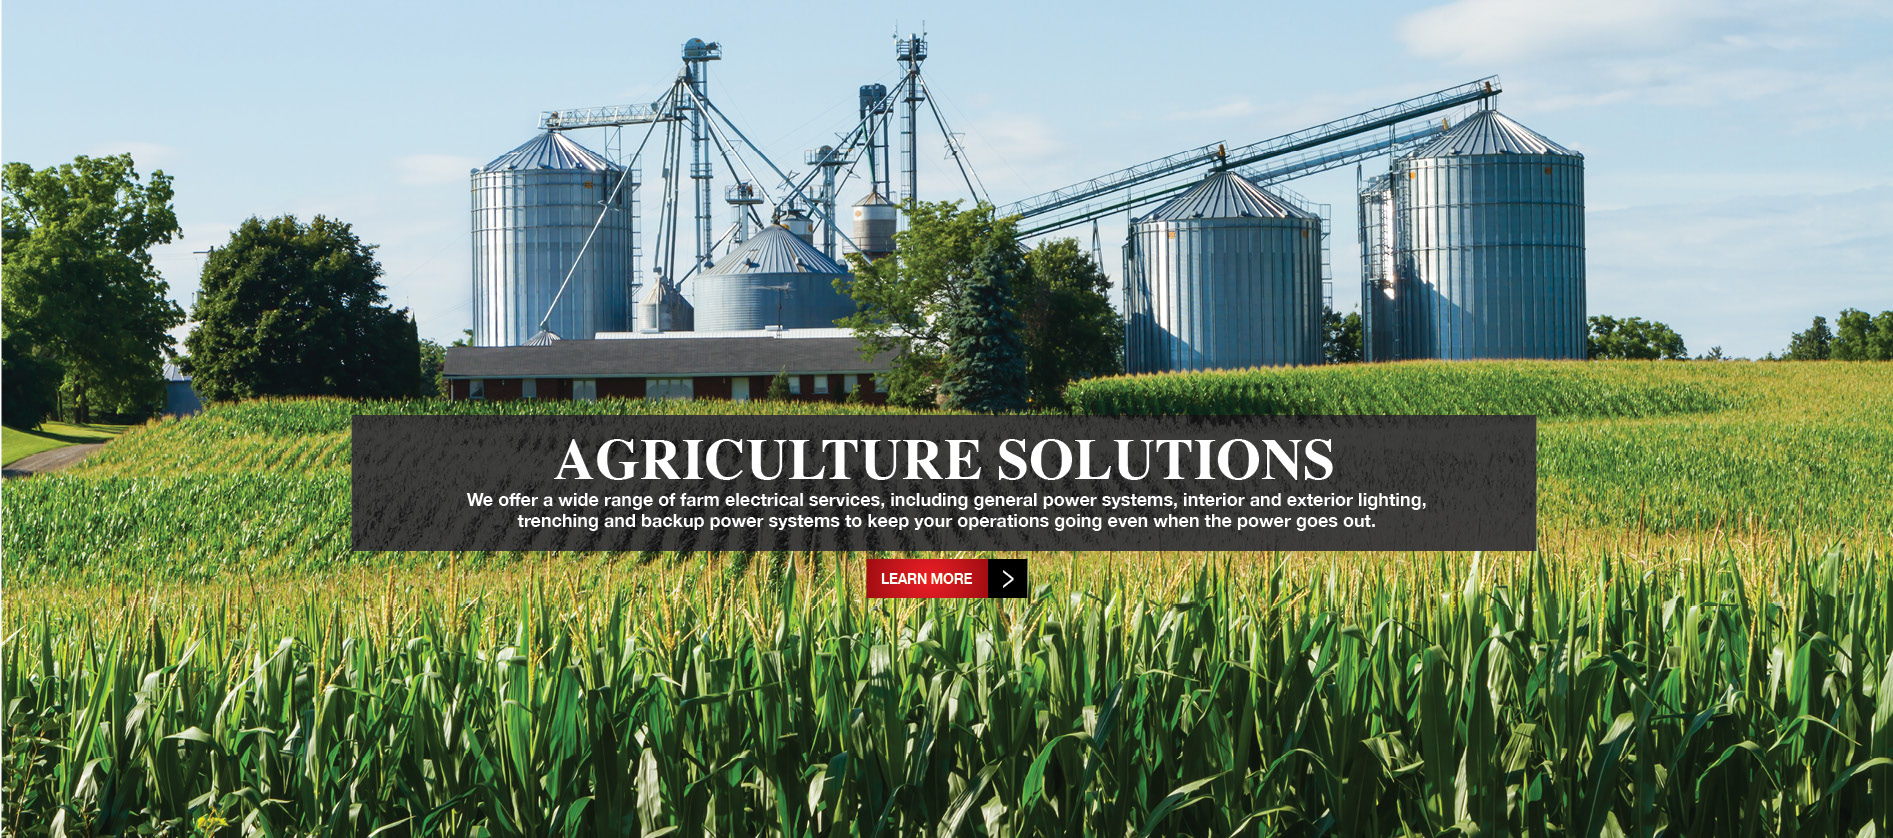 Agriculture Solutions - We offer a wide range of farm electrical services, including general power systems, interior and exterior lighting, trenching and backup power systems to keep your operations going even when the power goes out.